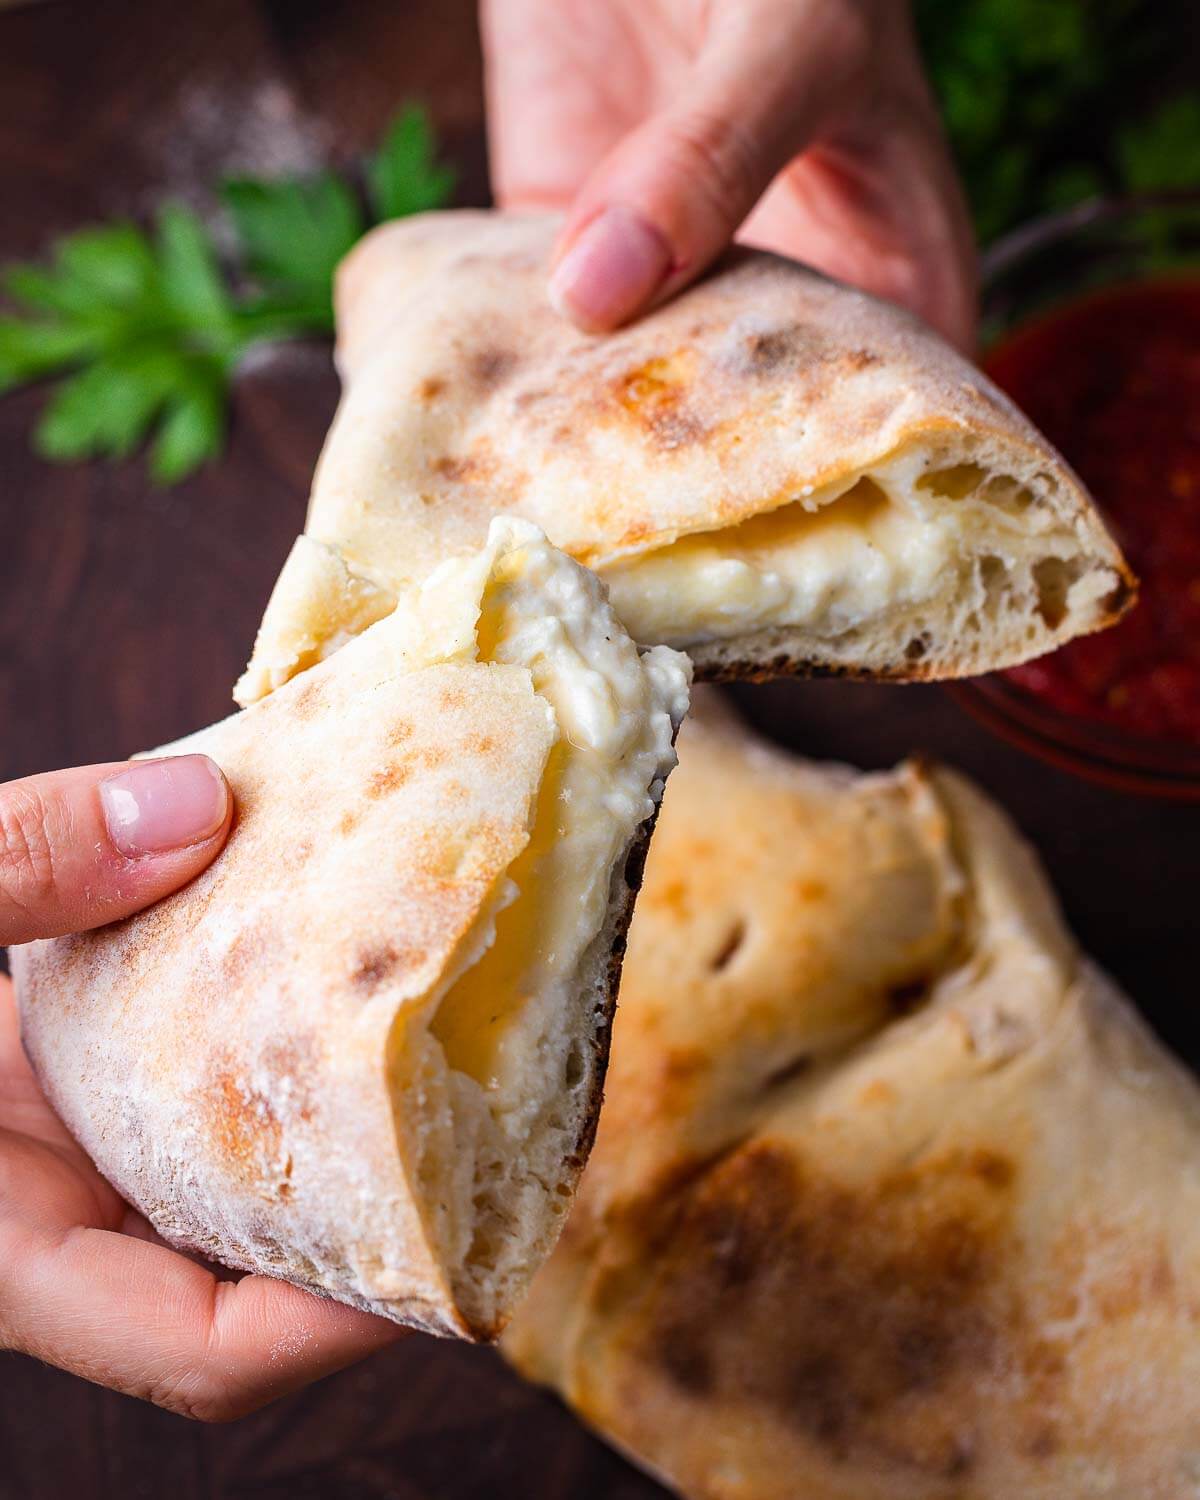 Hands holding cut in half calzone.